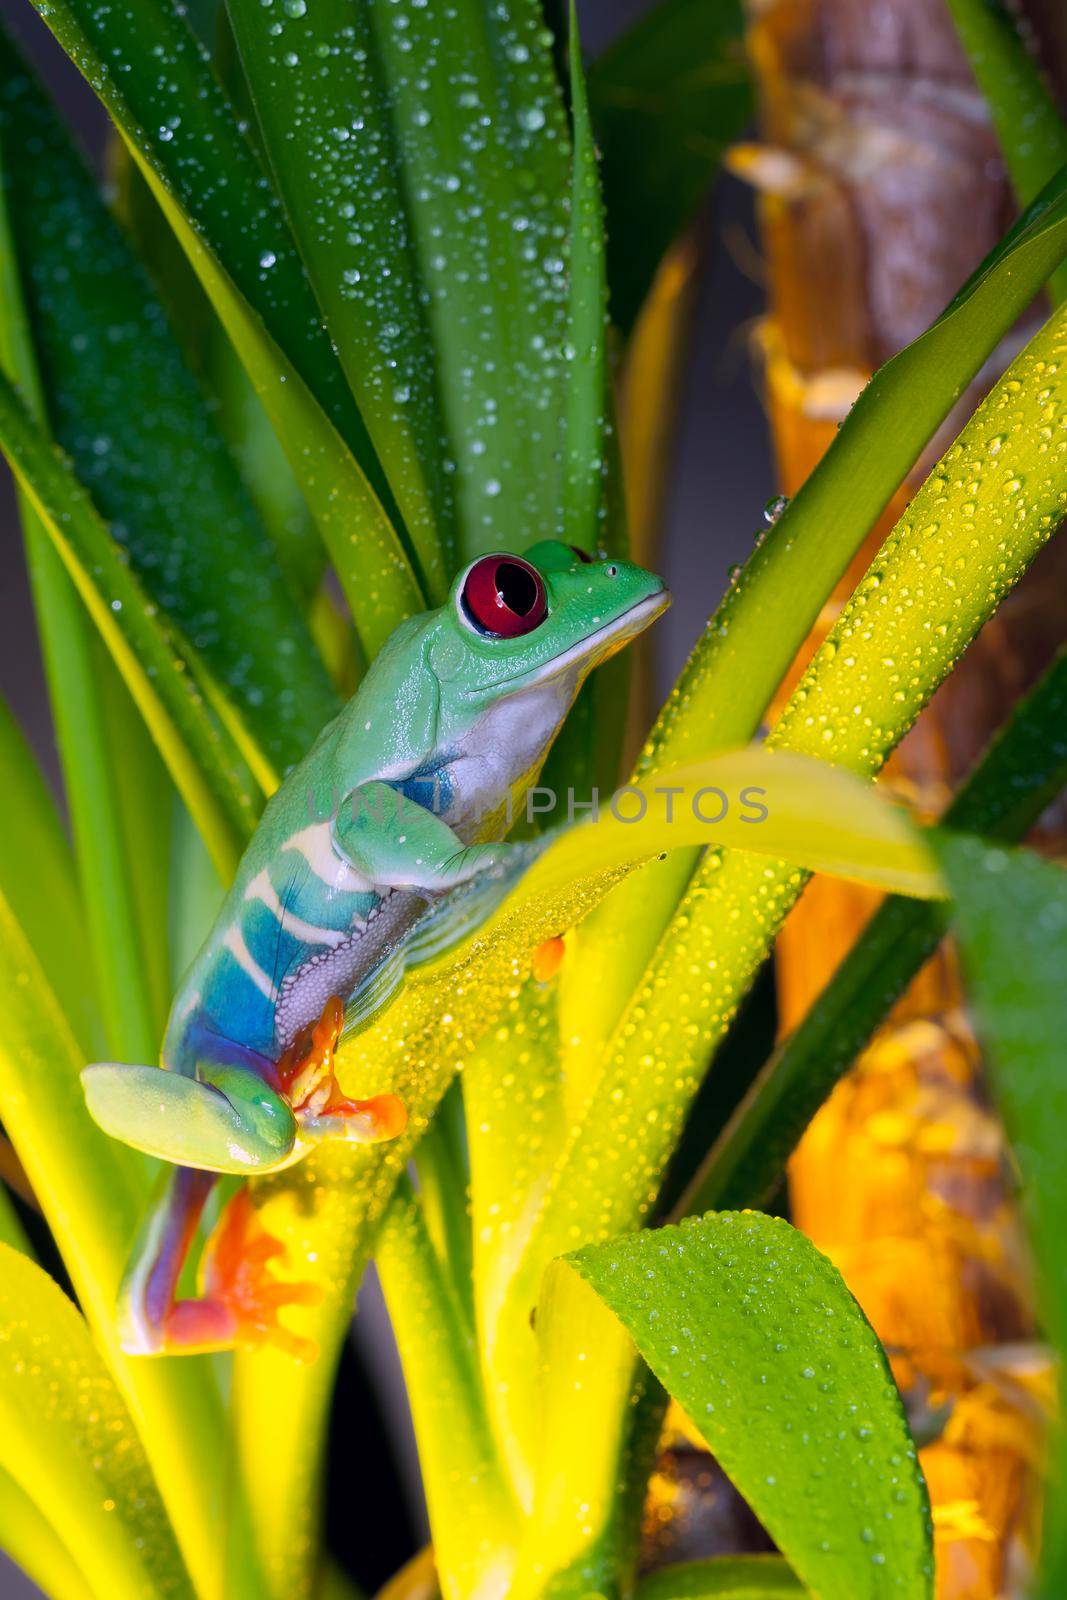 Red-eyed tree frog playing in the yellow light by Lincikas